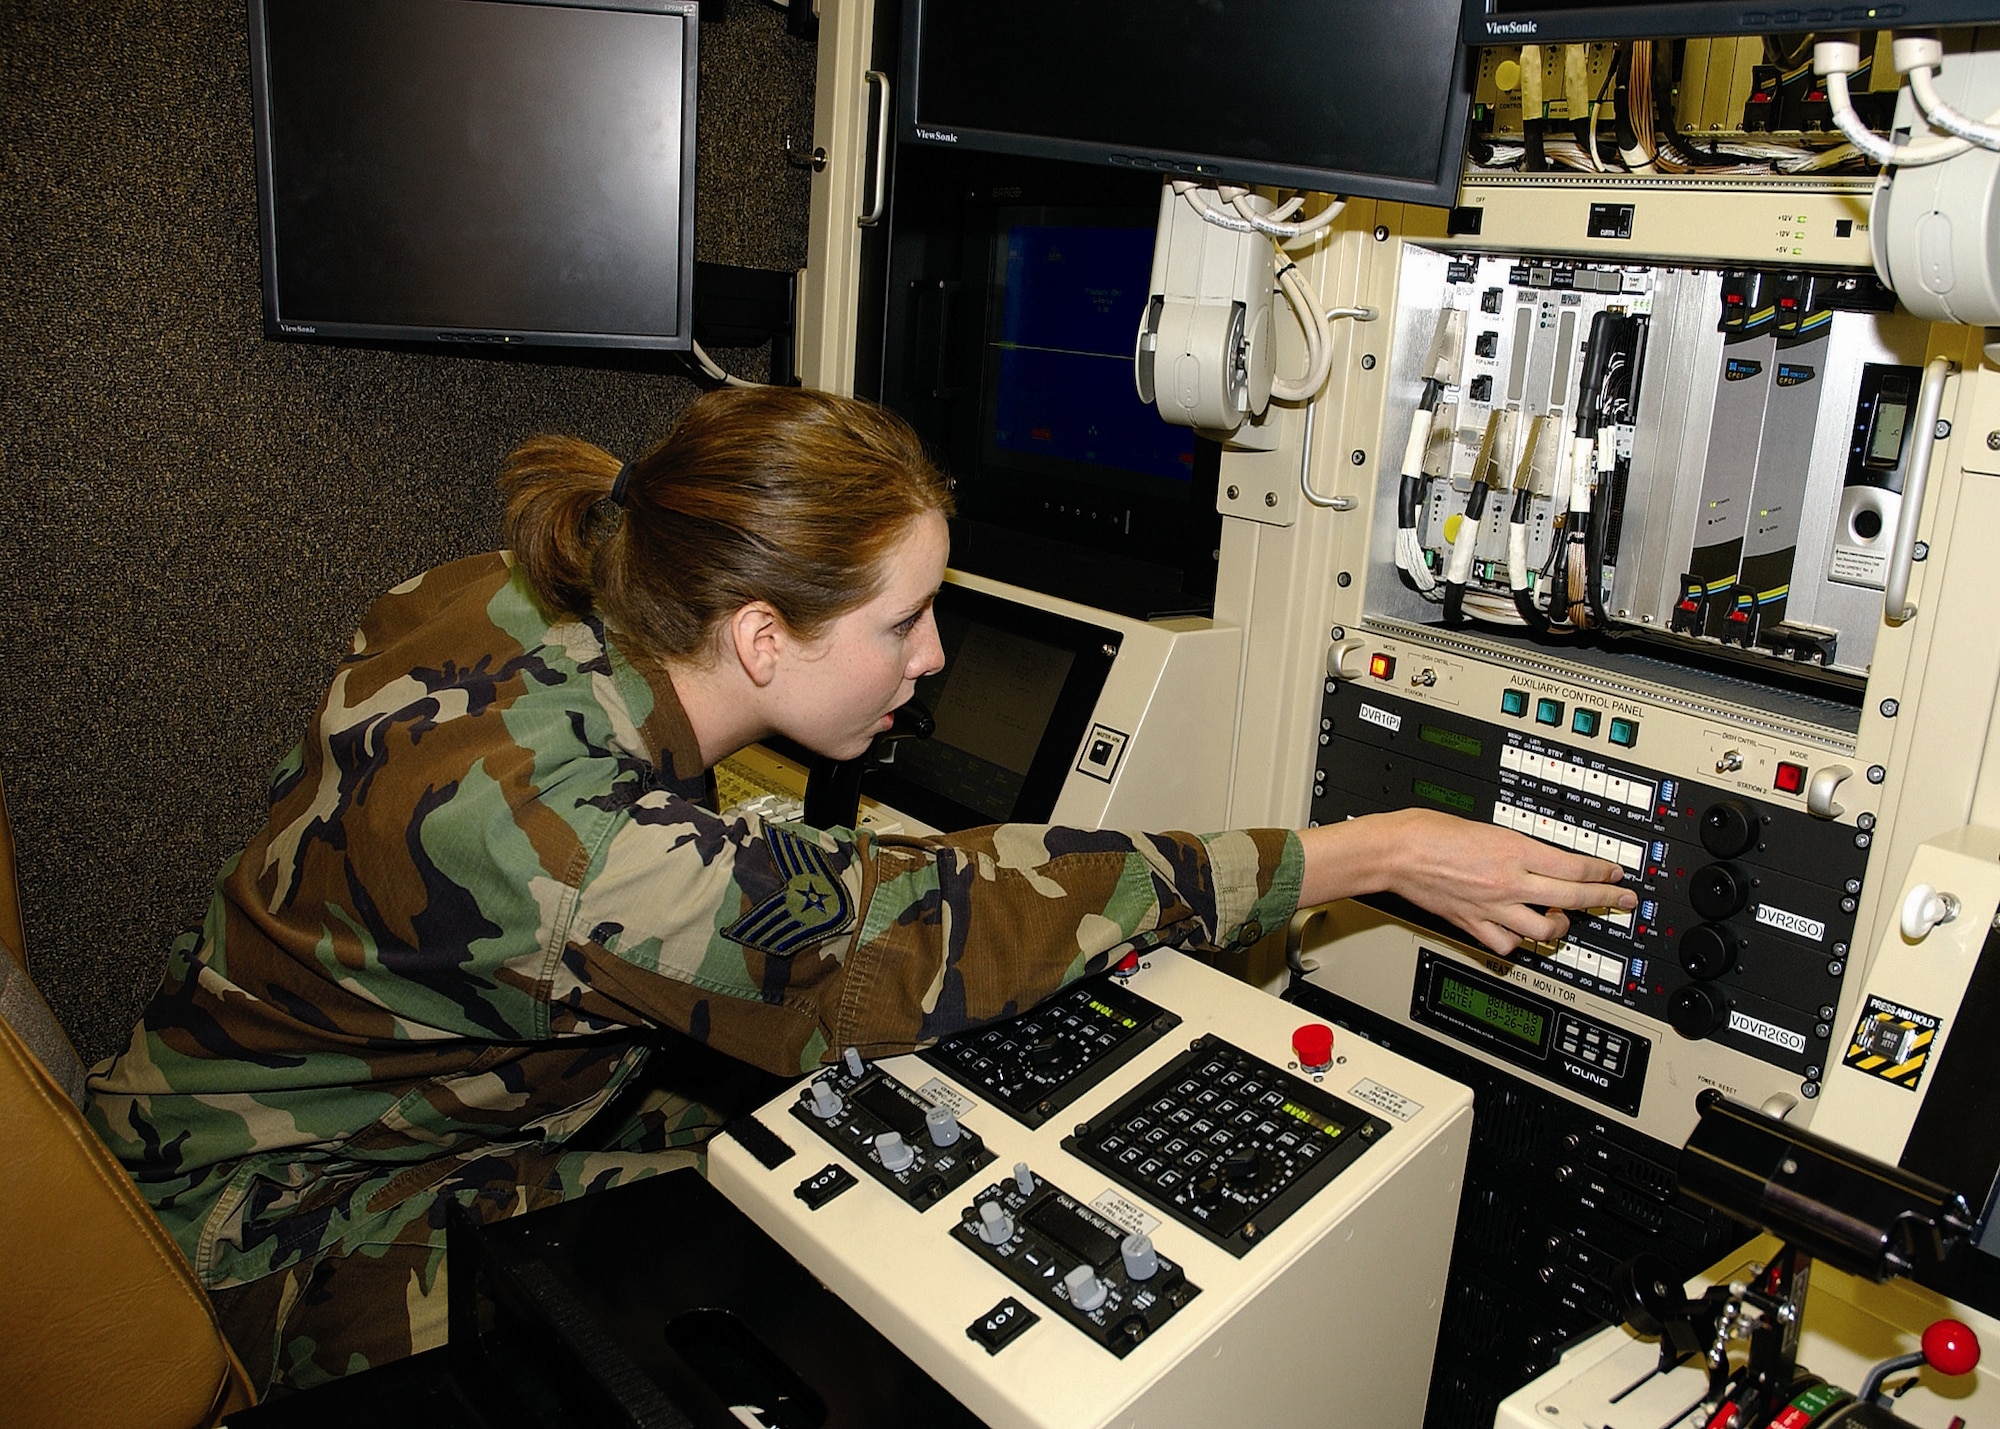 Staff Sgt. Carolyn Smette, a Ground Control Station maintenance technician assigned to the North Dakota Air National Guard’s 119th Wing, troubleshoots some of the GCS’ systems. (U.S. Air Force photo by Capt. Al Bosco)